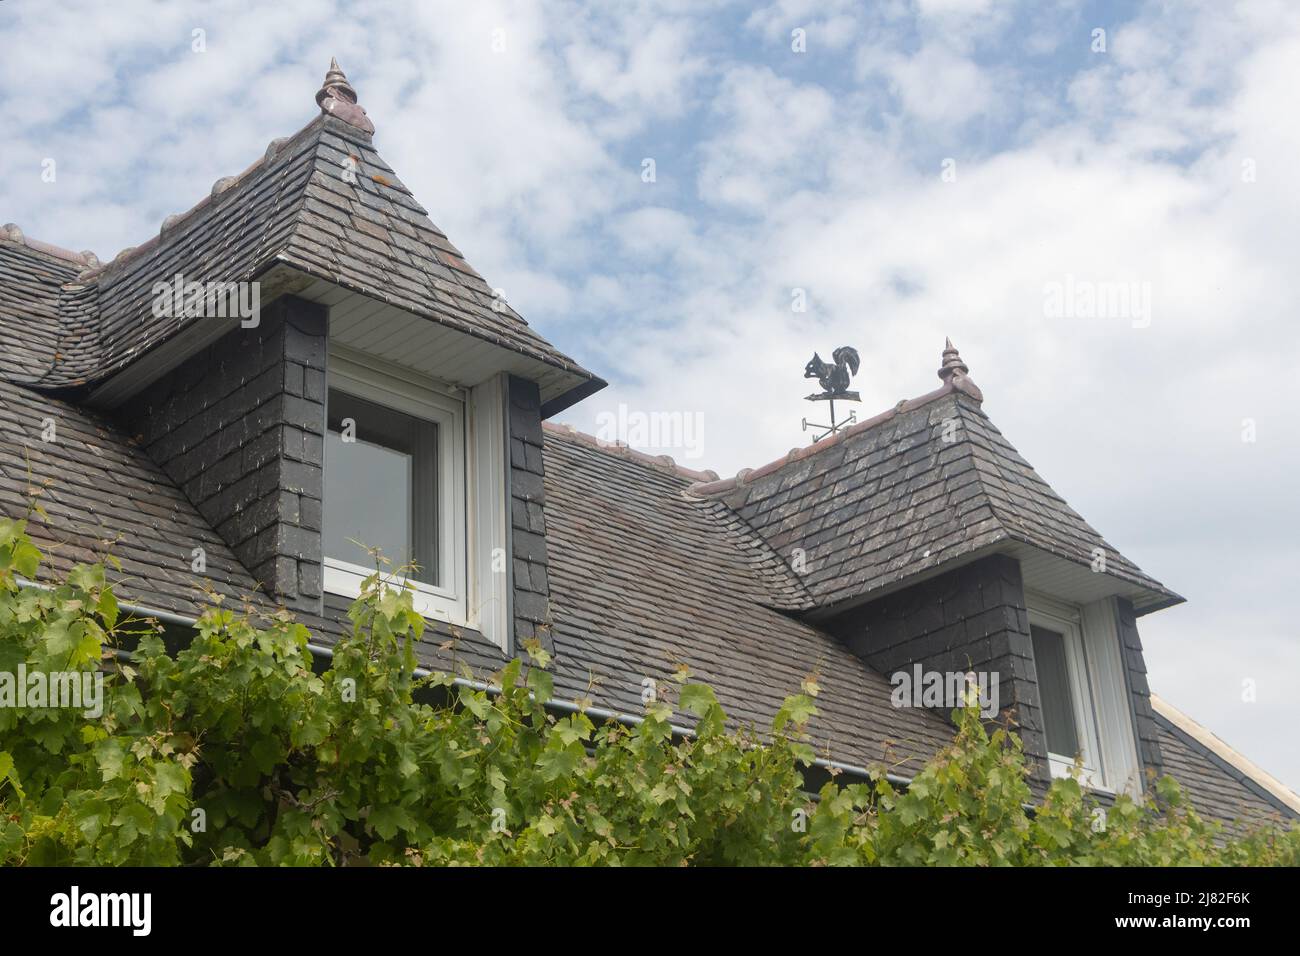 Dormer on the roof of an house Stock Photo